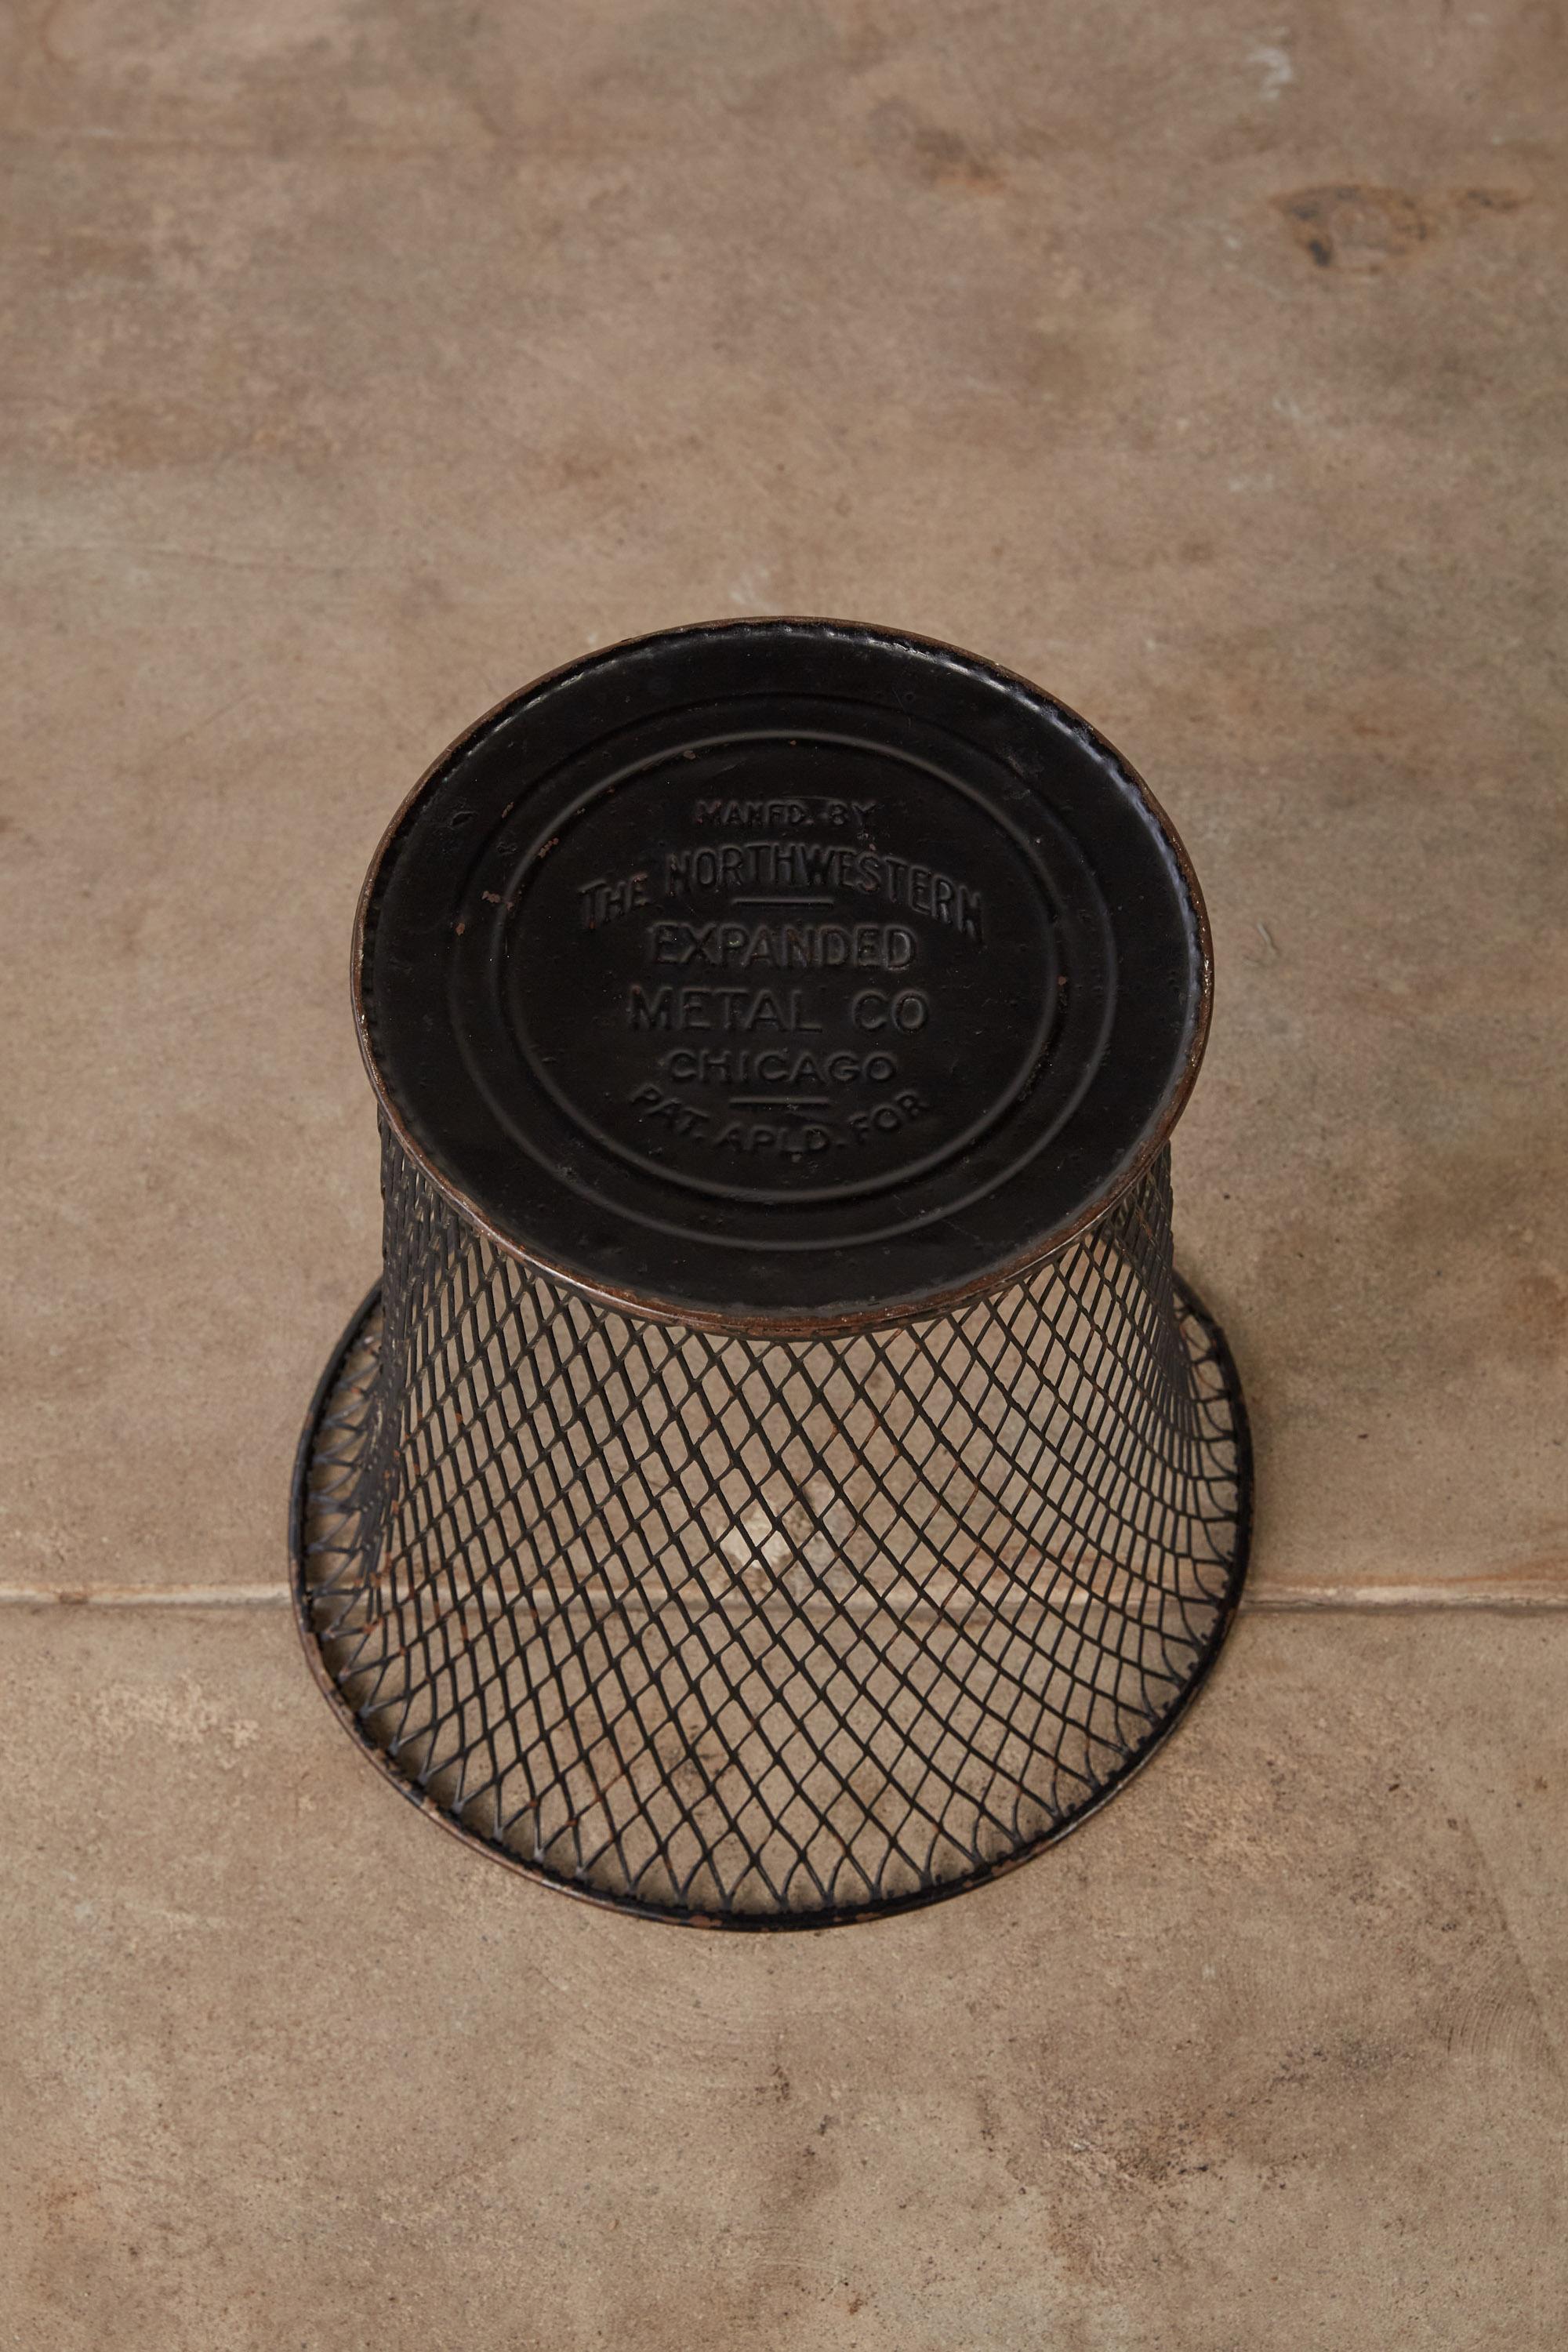 Mid-20th Century Northwestern Expanded Metal Company Waste Basket